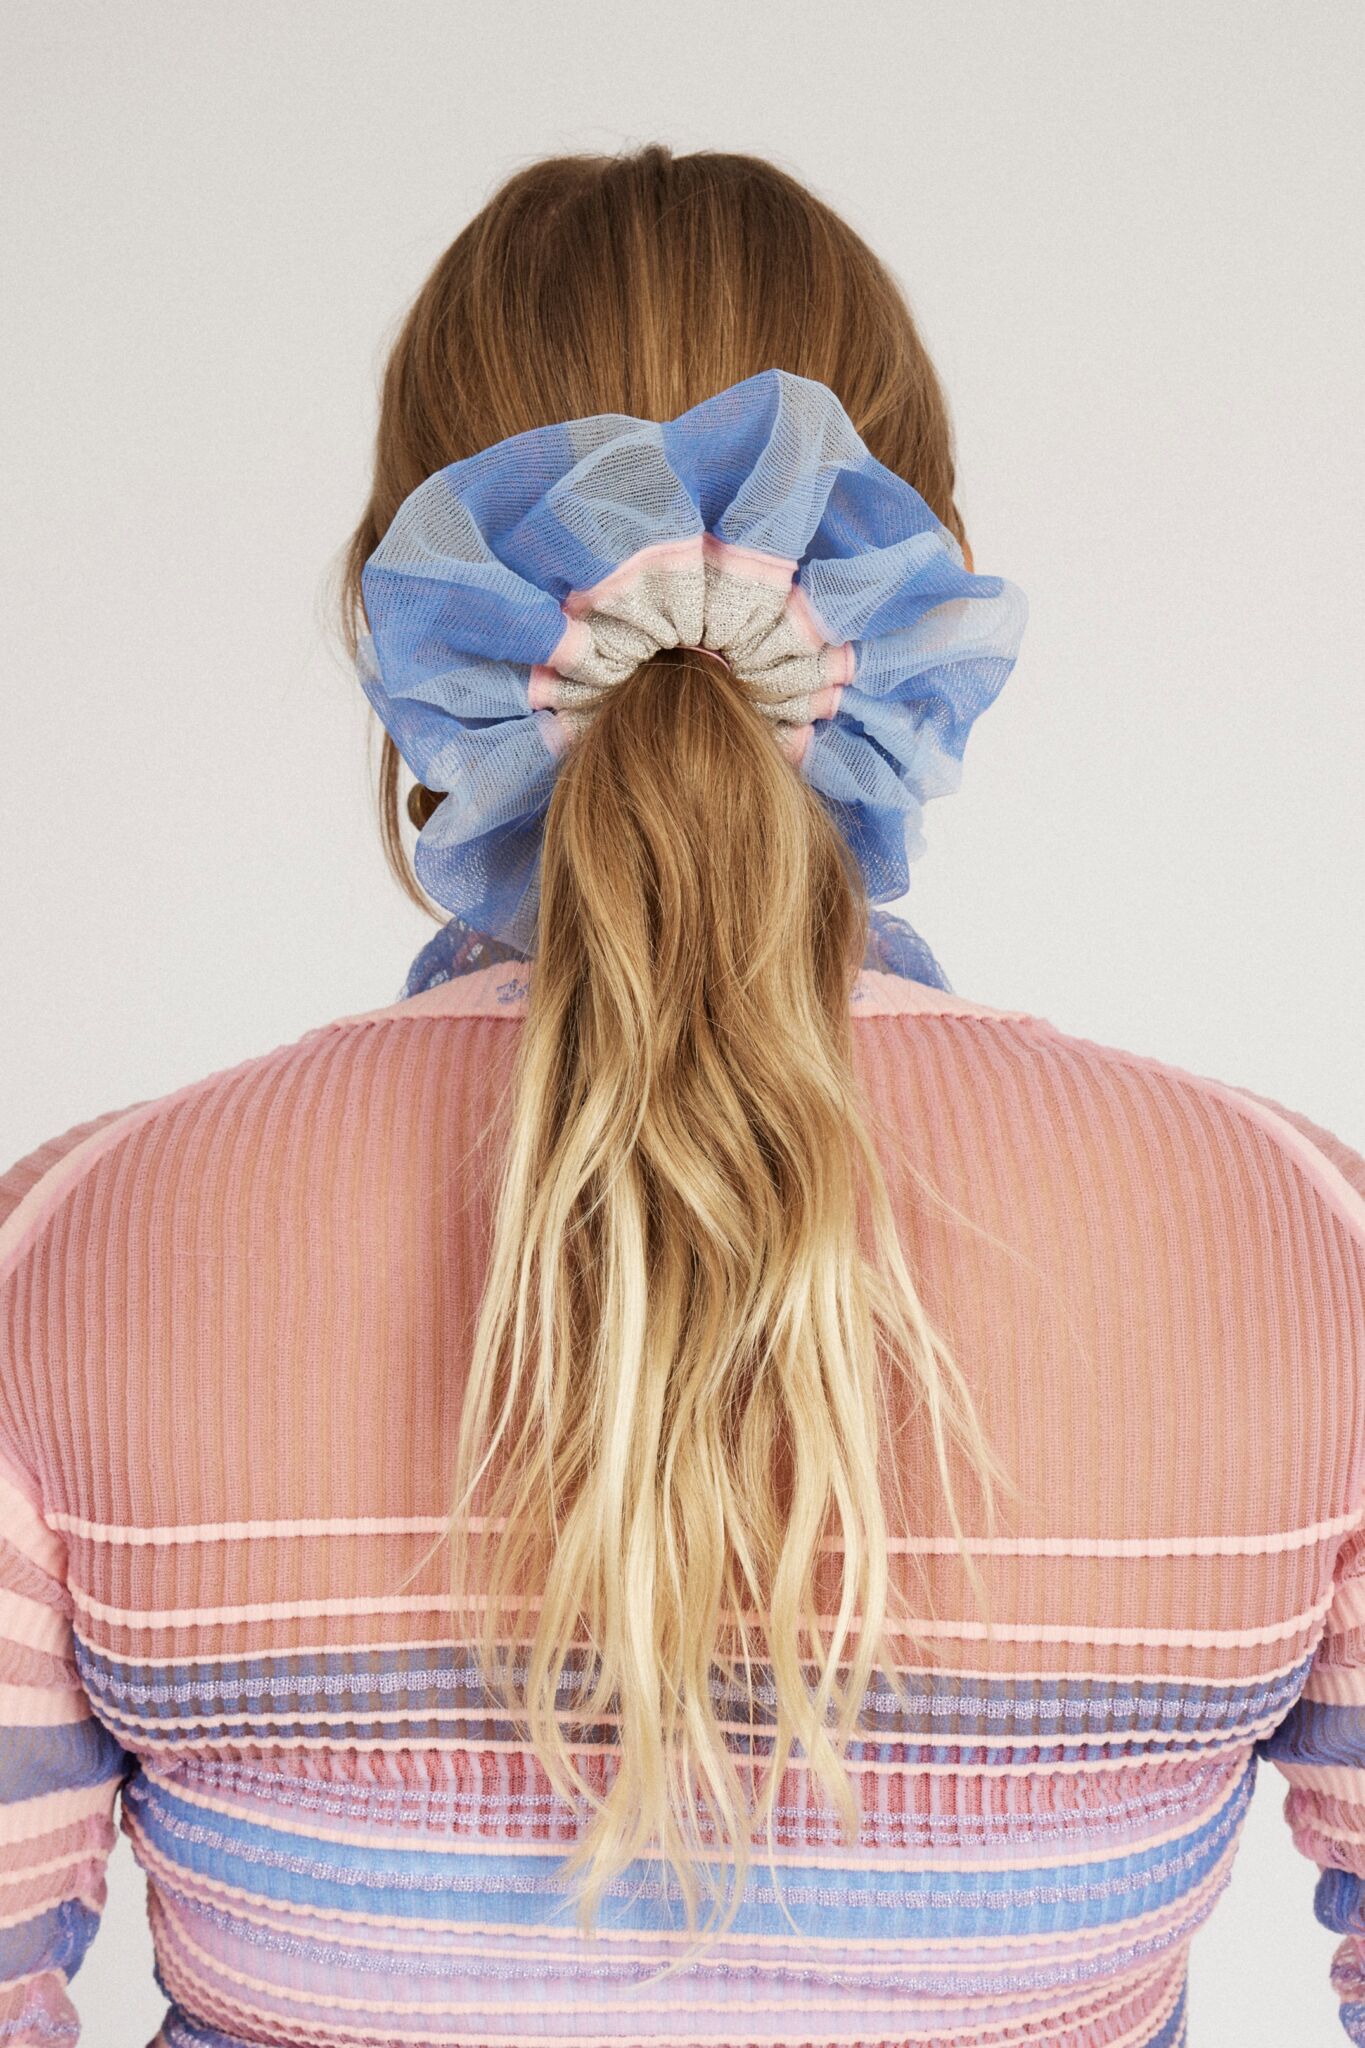 Petunia Scrunchie in powder blue and pink is a knitted scrunchie in bold stripes. Made of transparent and shimmery yarns.